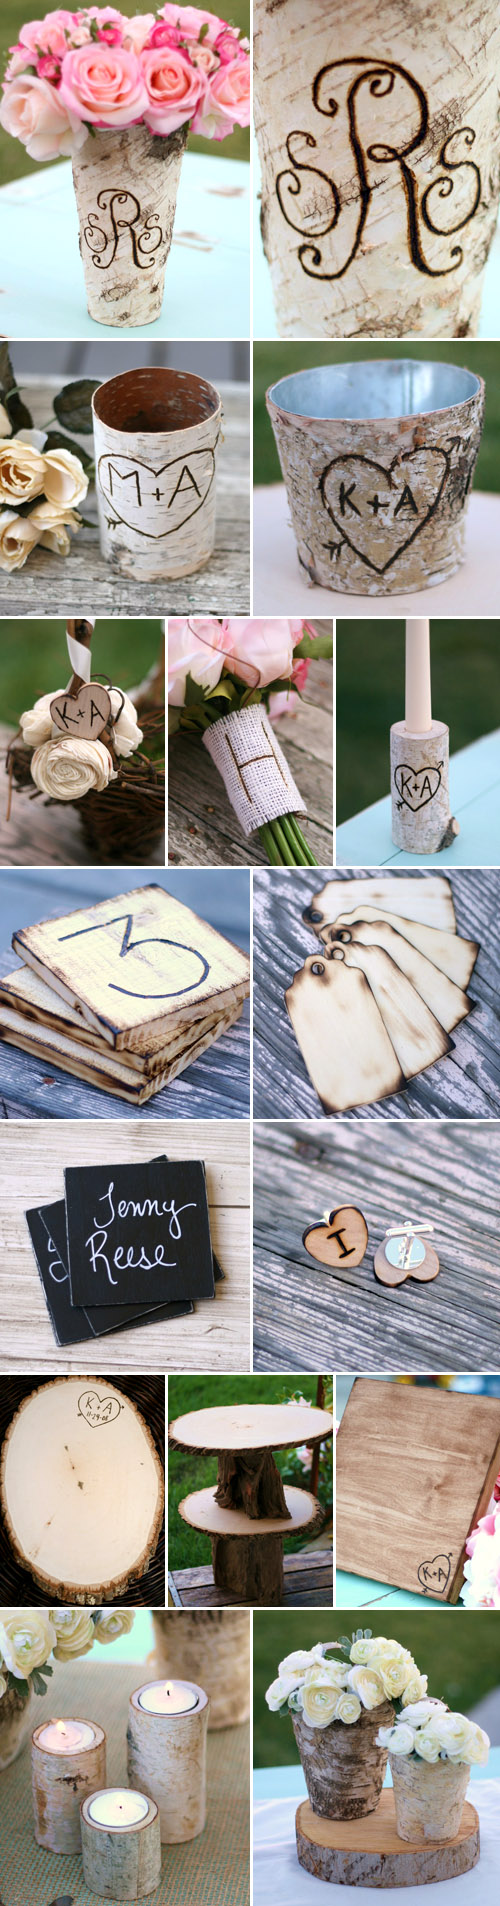 rustic woodland wedding decor and accessories from Bragging Bags on Etsy.com